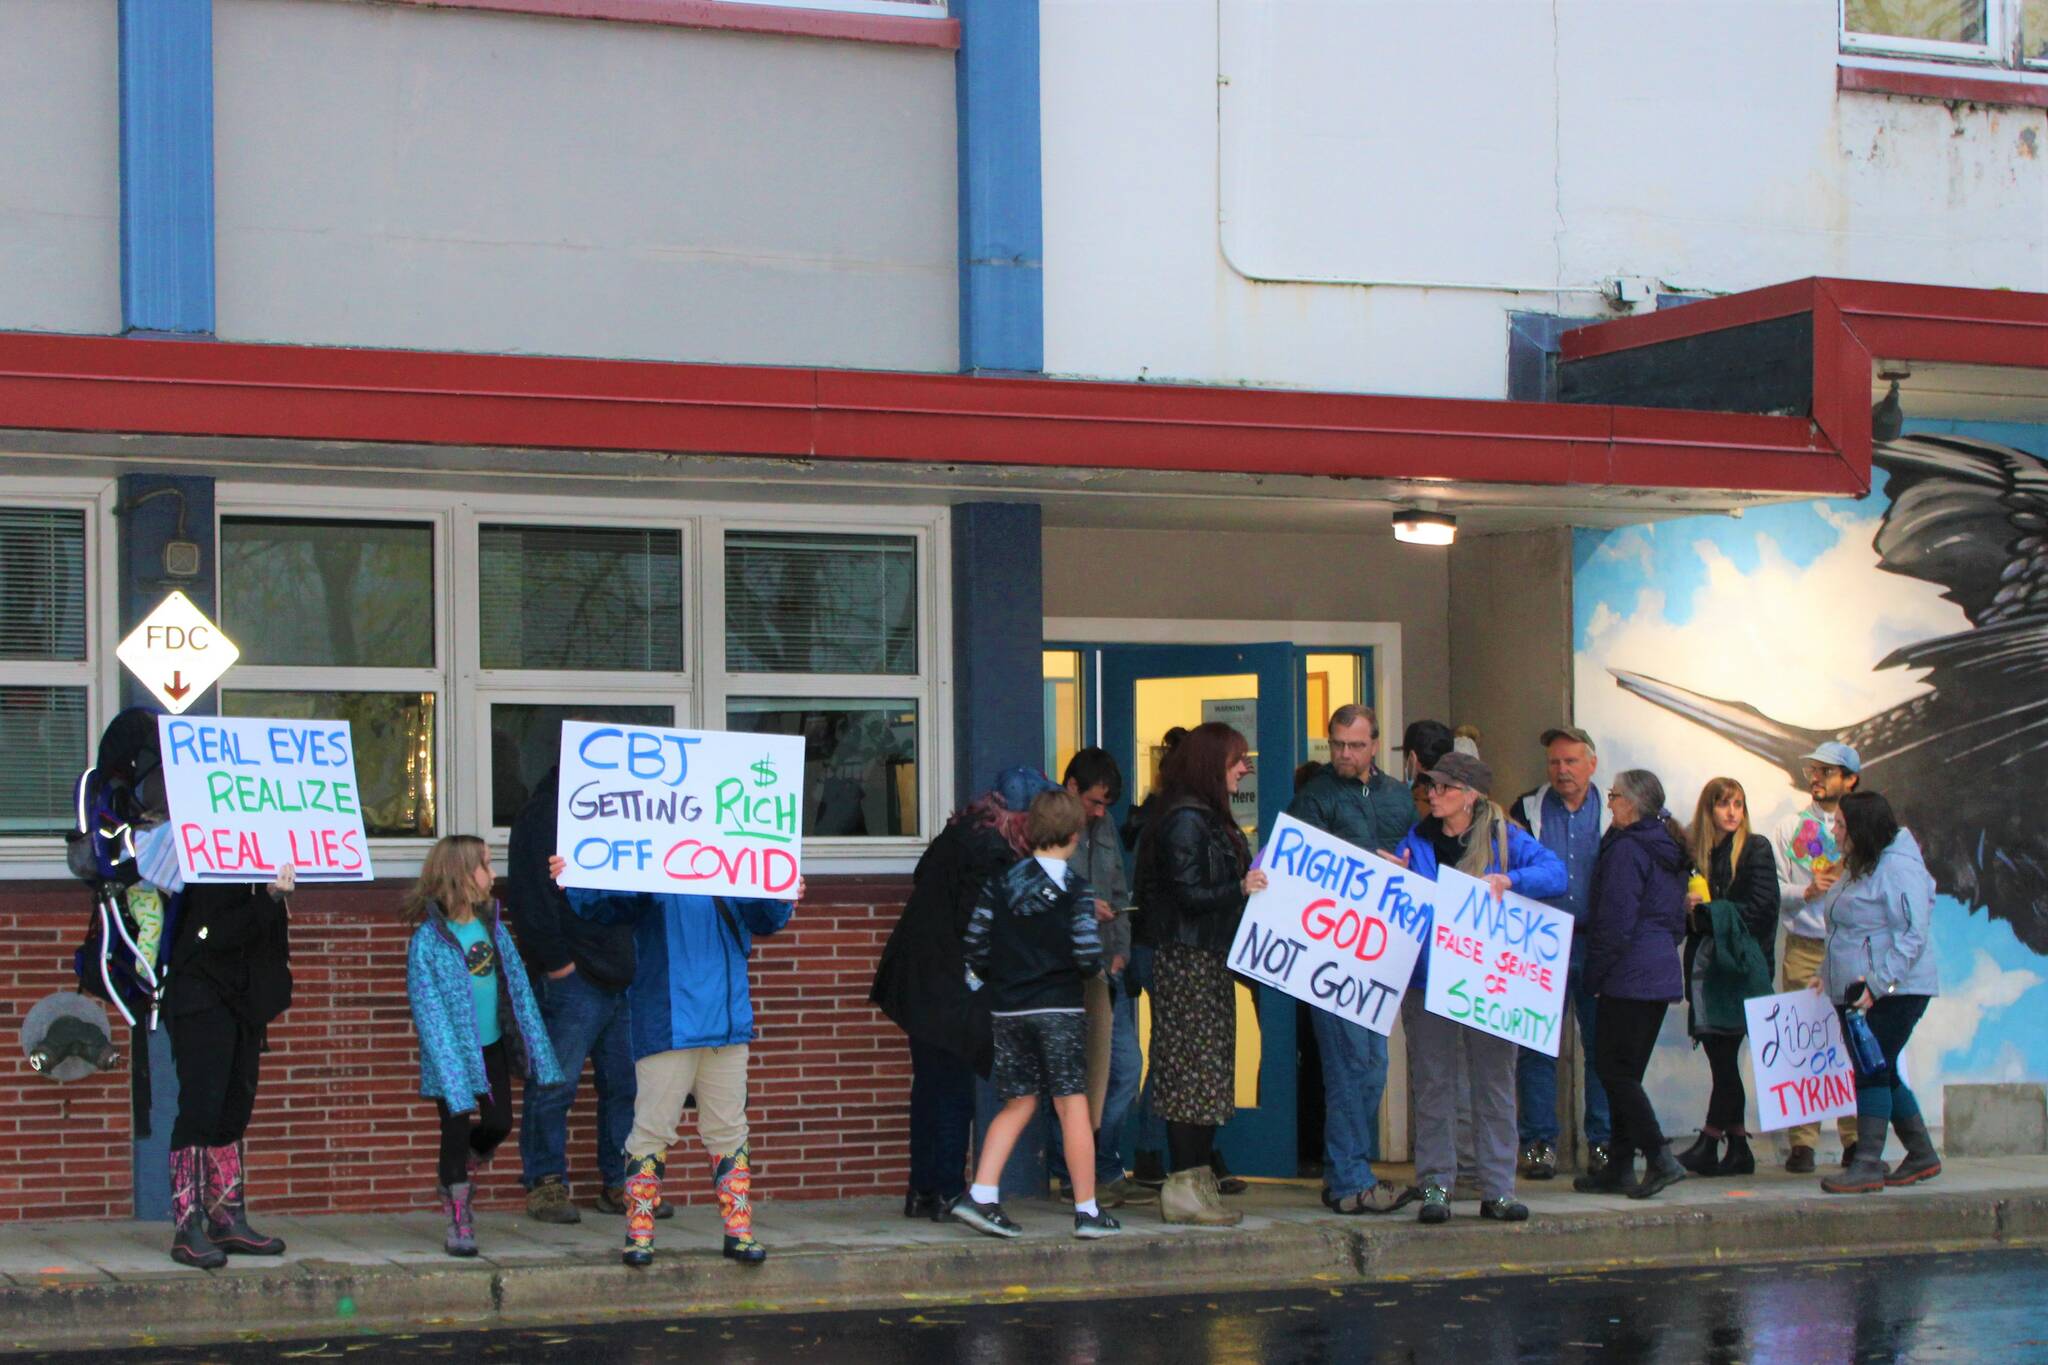 Several people participated in a rally in front of City Hall on Sept. 29, before the city assembly considered extending the current COVID-19 mitigation measures. At the meeting, assembly members voted to extend the measures through March 1, 2022. (Dana Zigmund/Juneau Empire)